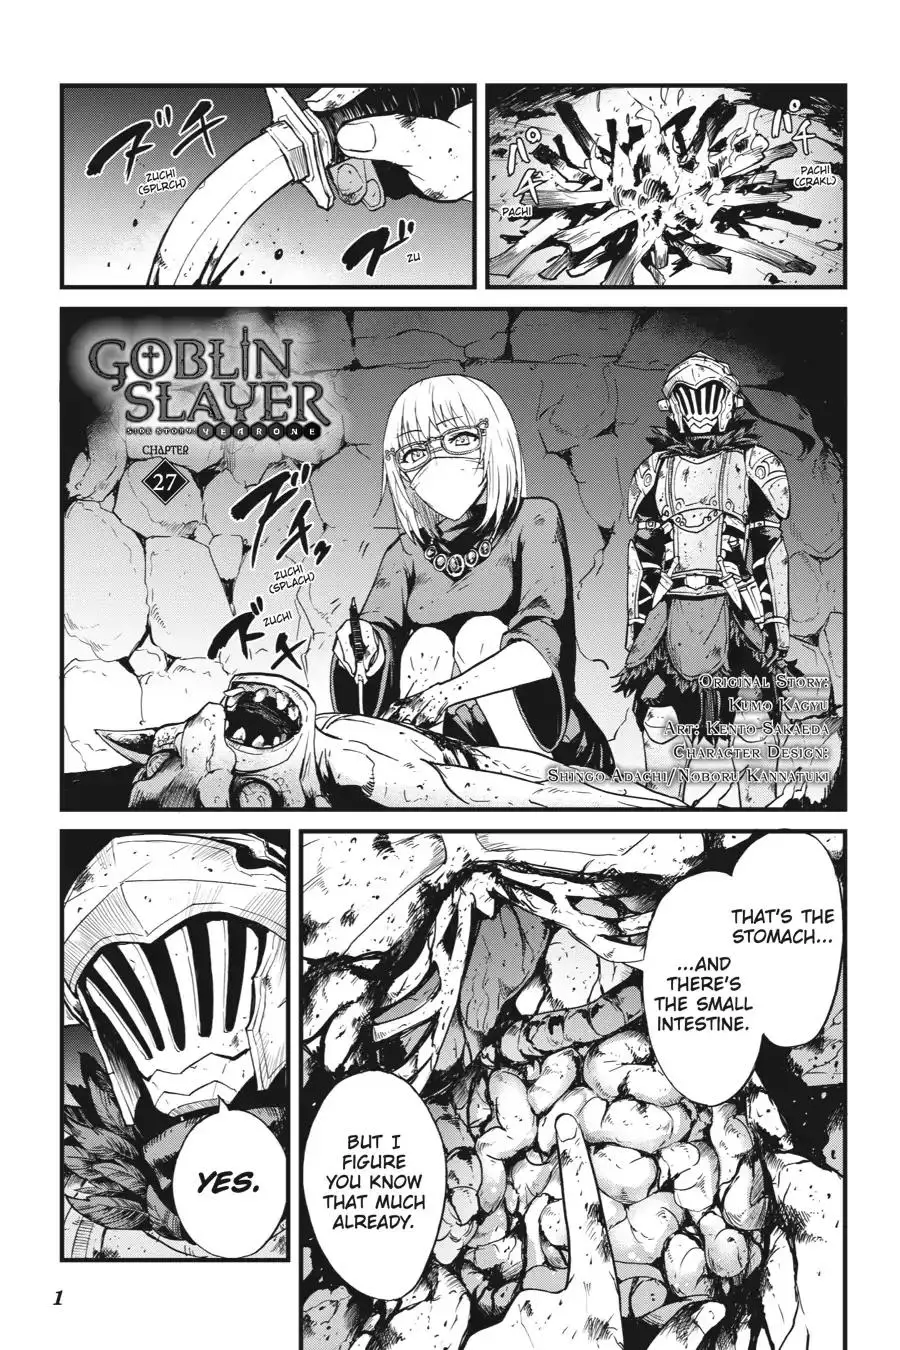 Goblin Slayer: Side Story Year One - 27 page 1